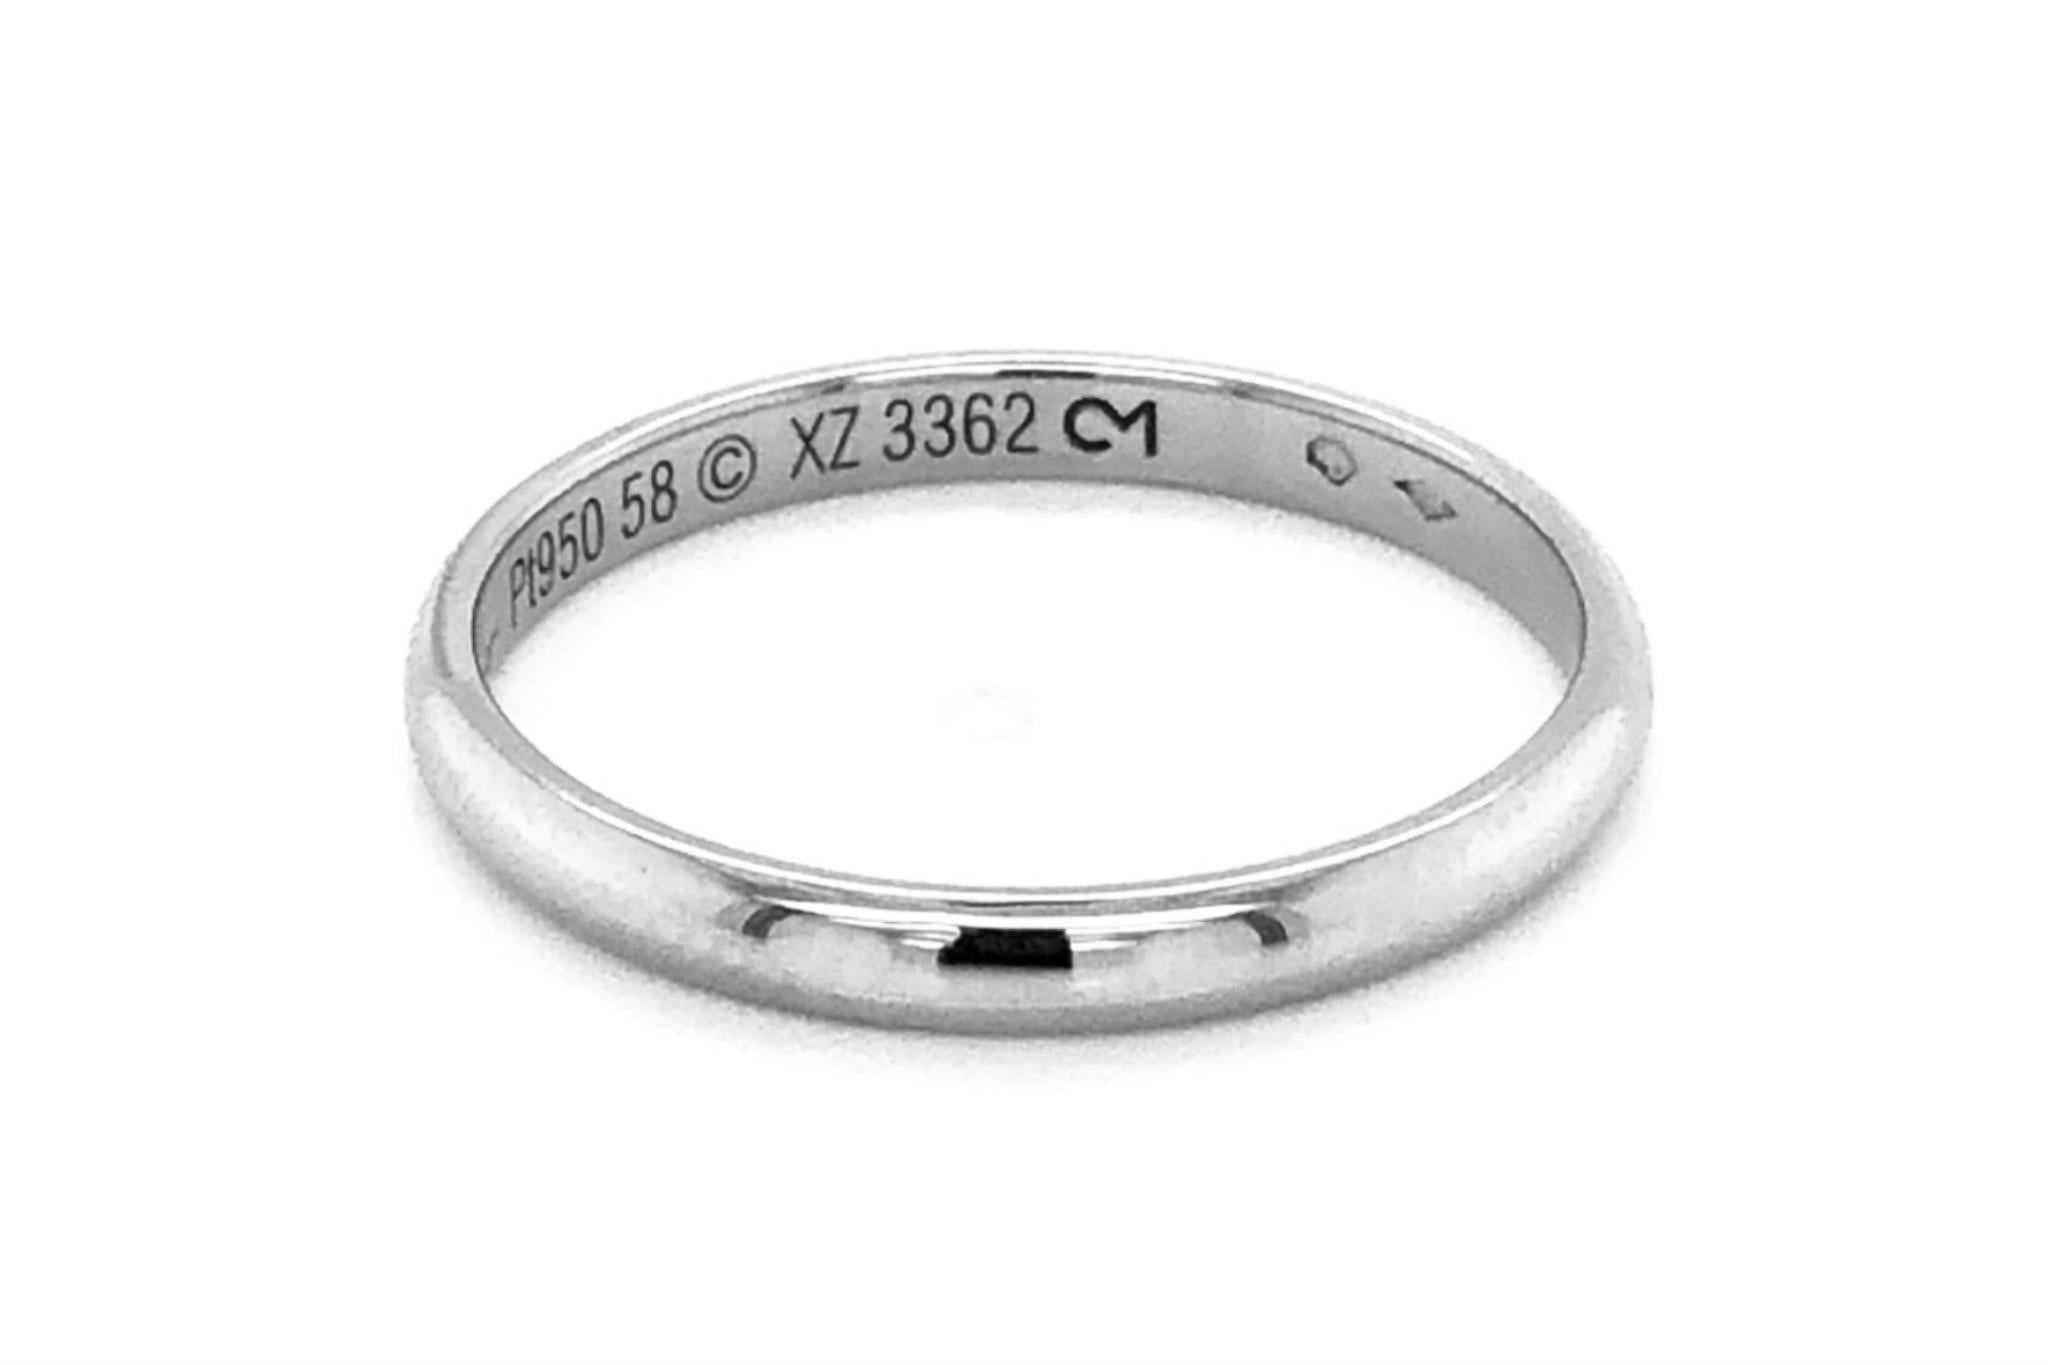 Cartier 1895 Wedding Band Ring Platinum, 2.5 mm Wide Size 8.25